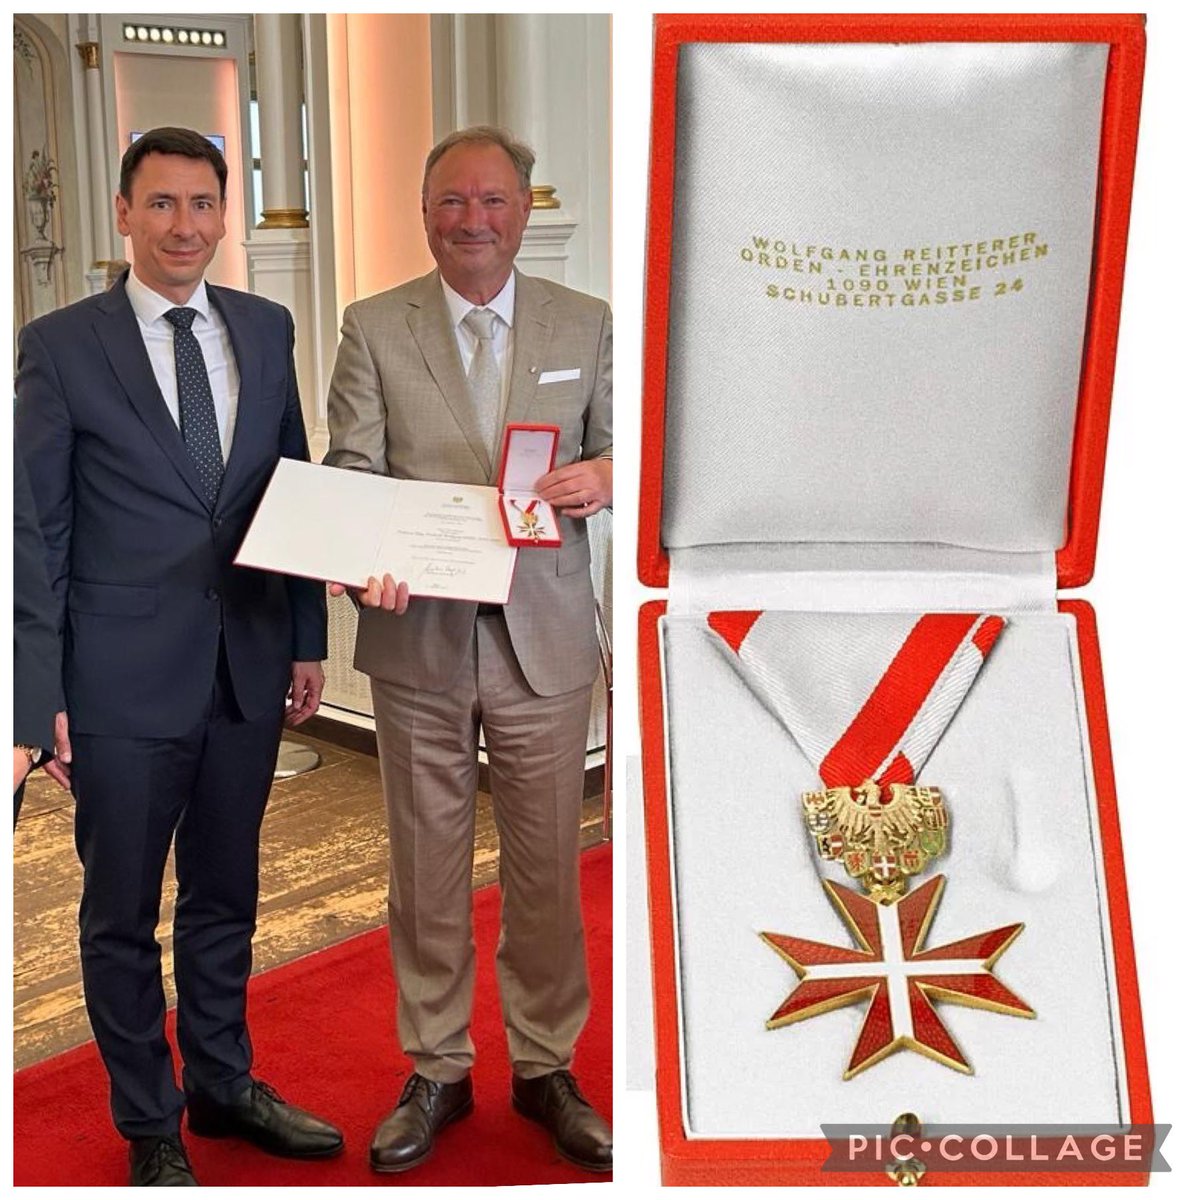 Hearty congratultions to the Slovak 🇸🇰 Honorary Consul in Styria and Carinthia, Professor Friedrich Sperl, 
on the award of the Gold Medal of Honor.